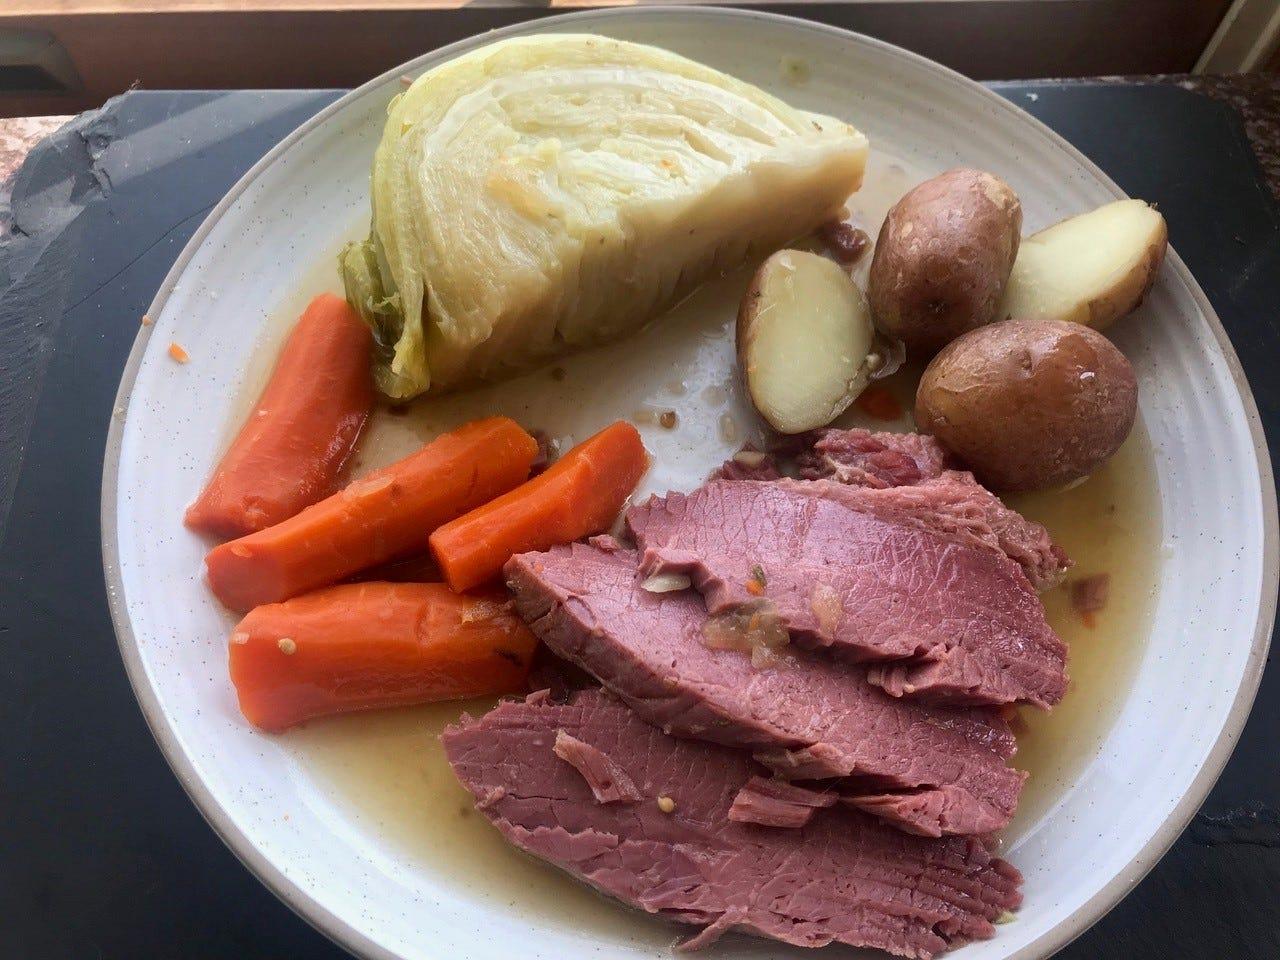 Corned beef and cabbage is a dish typically eaten on St. Patrick